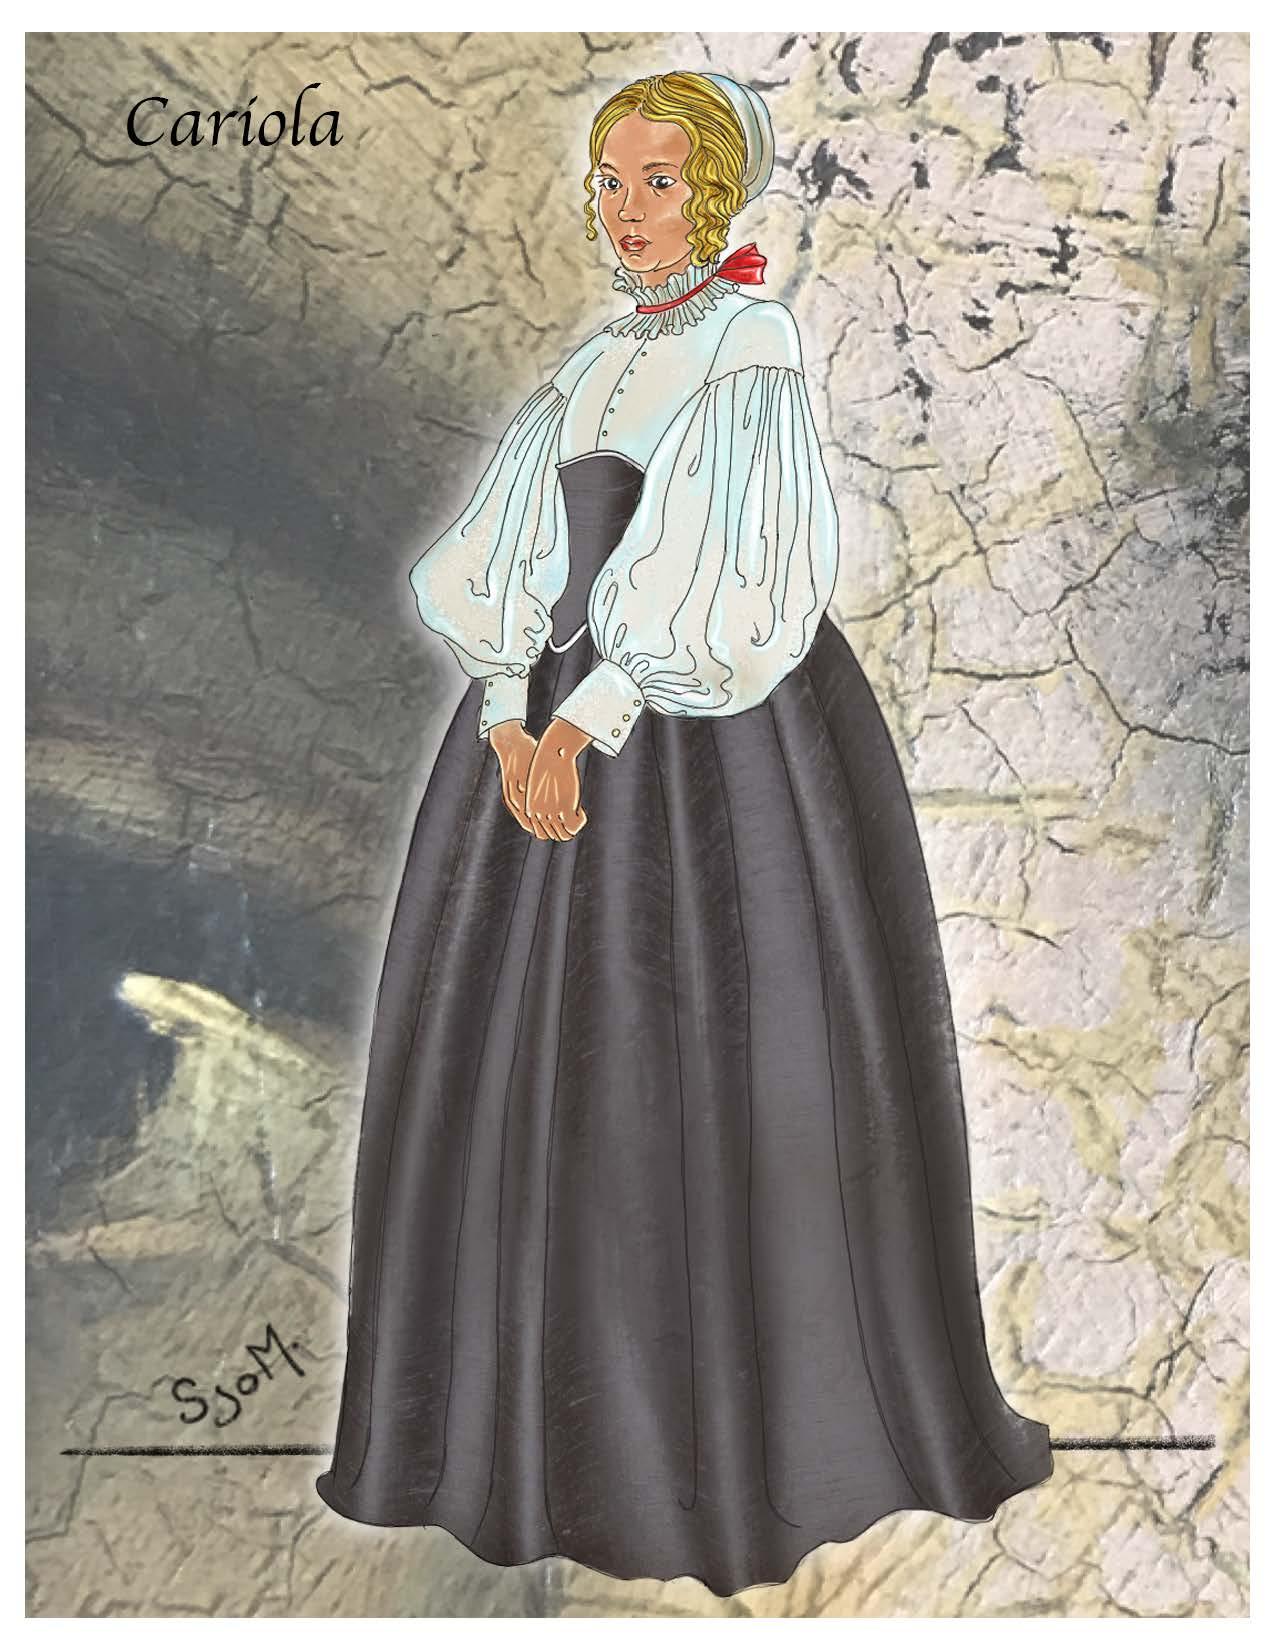 illustration of a woman wearing a bun cap and long dress with wide skirt, puffy sleeves, corset, and mini elizabethan collar 